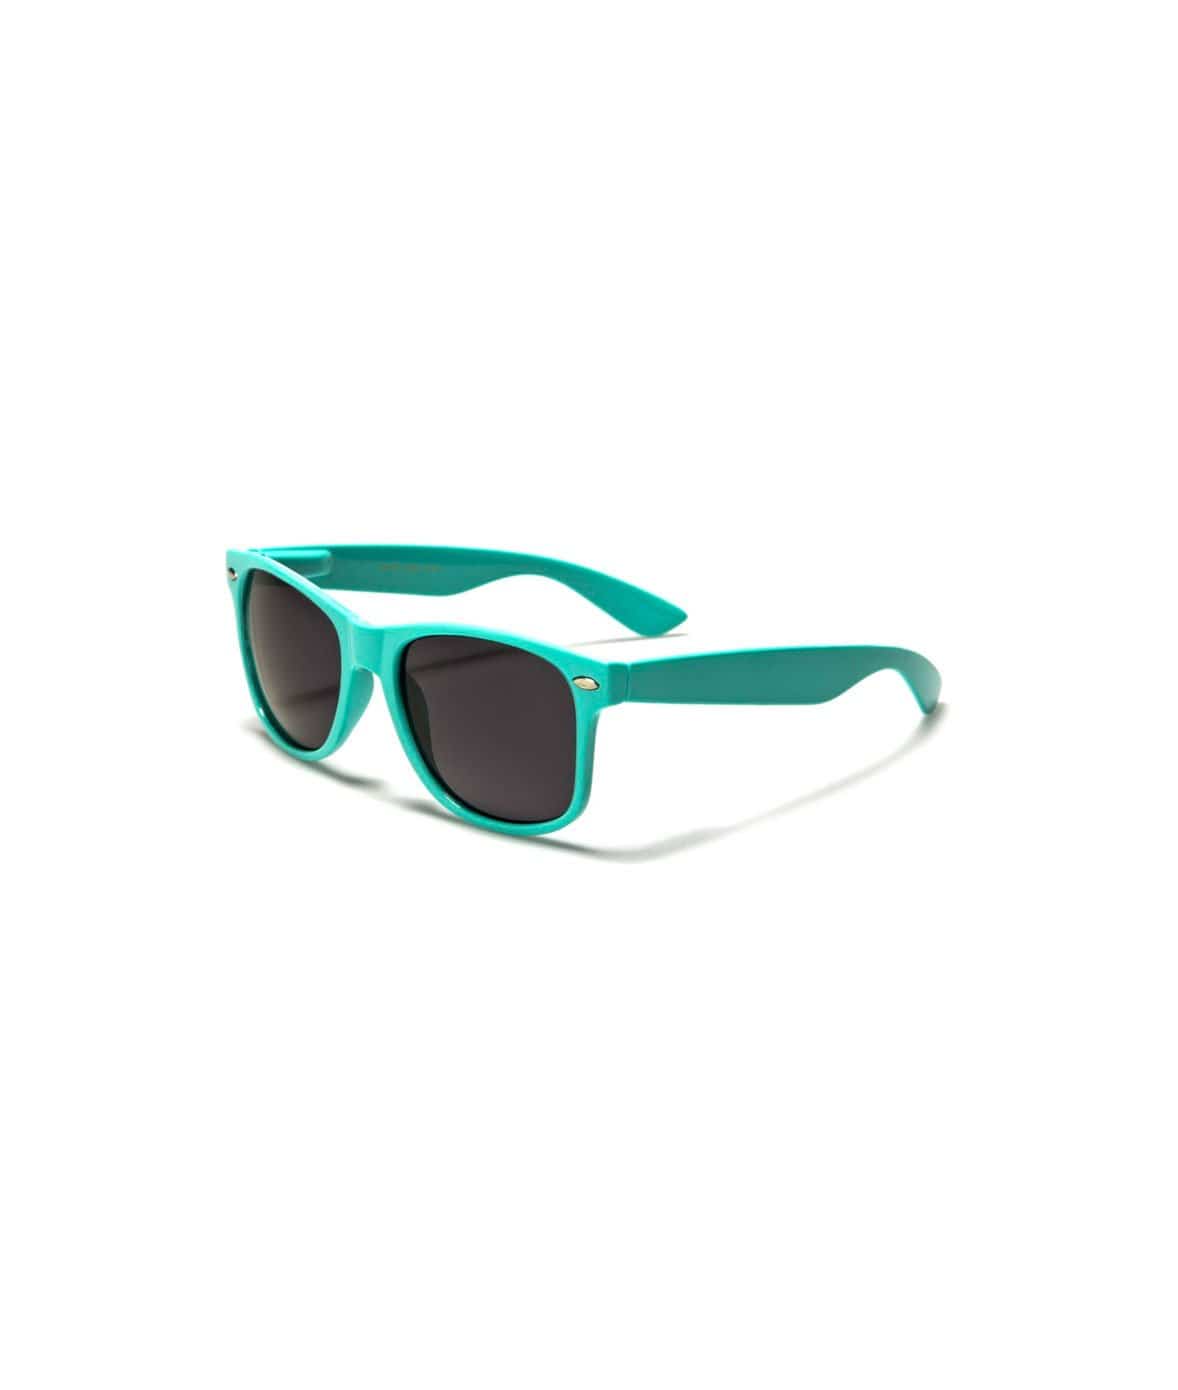 Nayked Apparel Women Women's Classic Retro Sunglasses with UV Protection, Lifetime Guarantee Teal / NAY-S-W-WF01